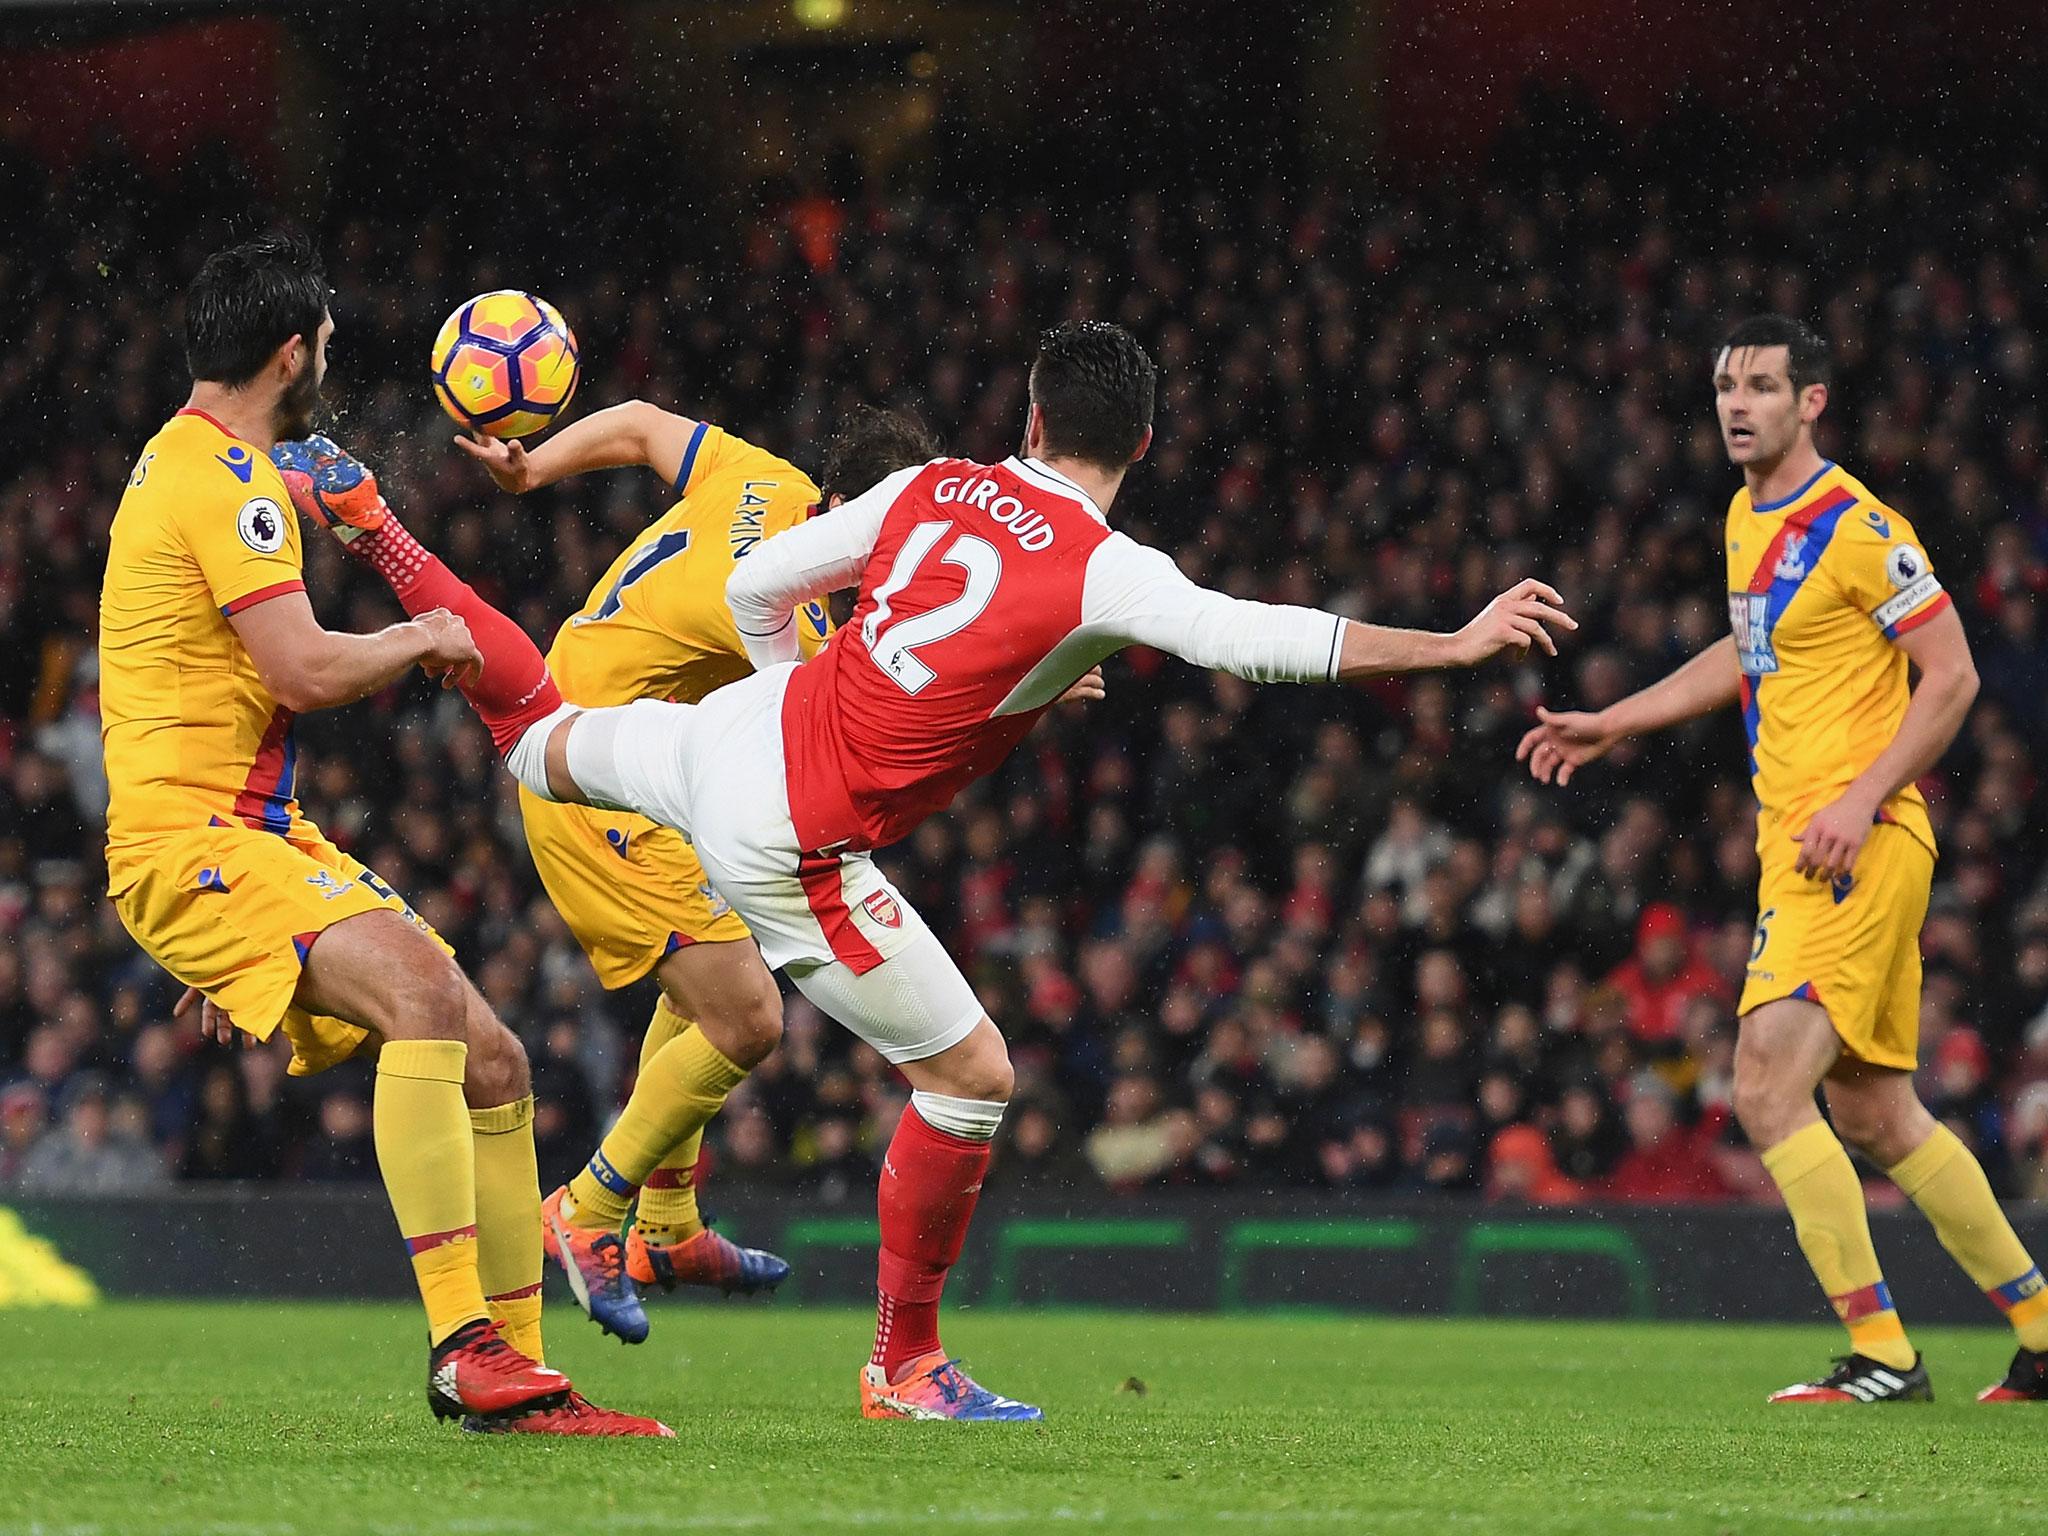 Giroud scored the scorpion kick against Crystal Palace in the Premier League